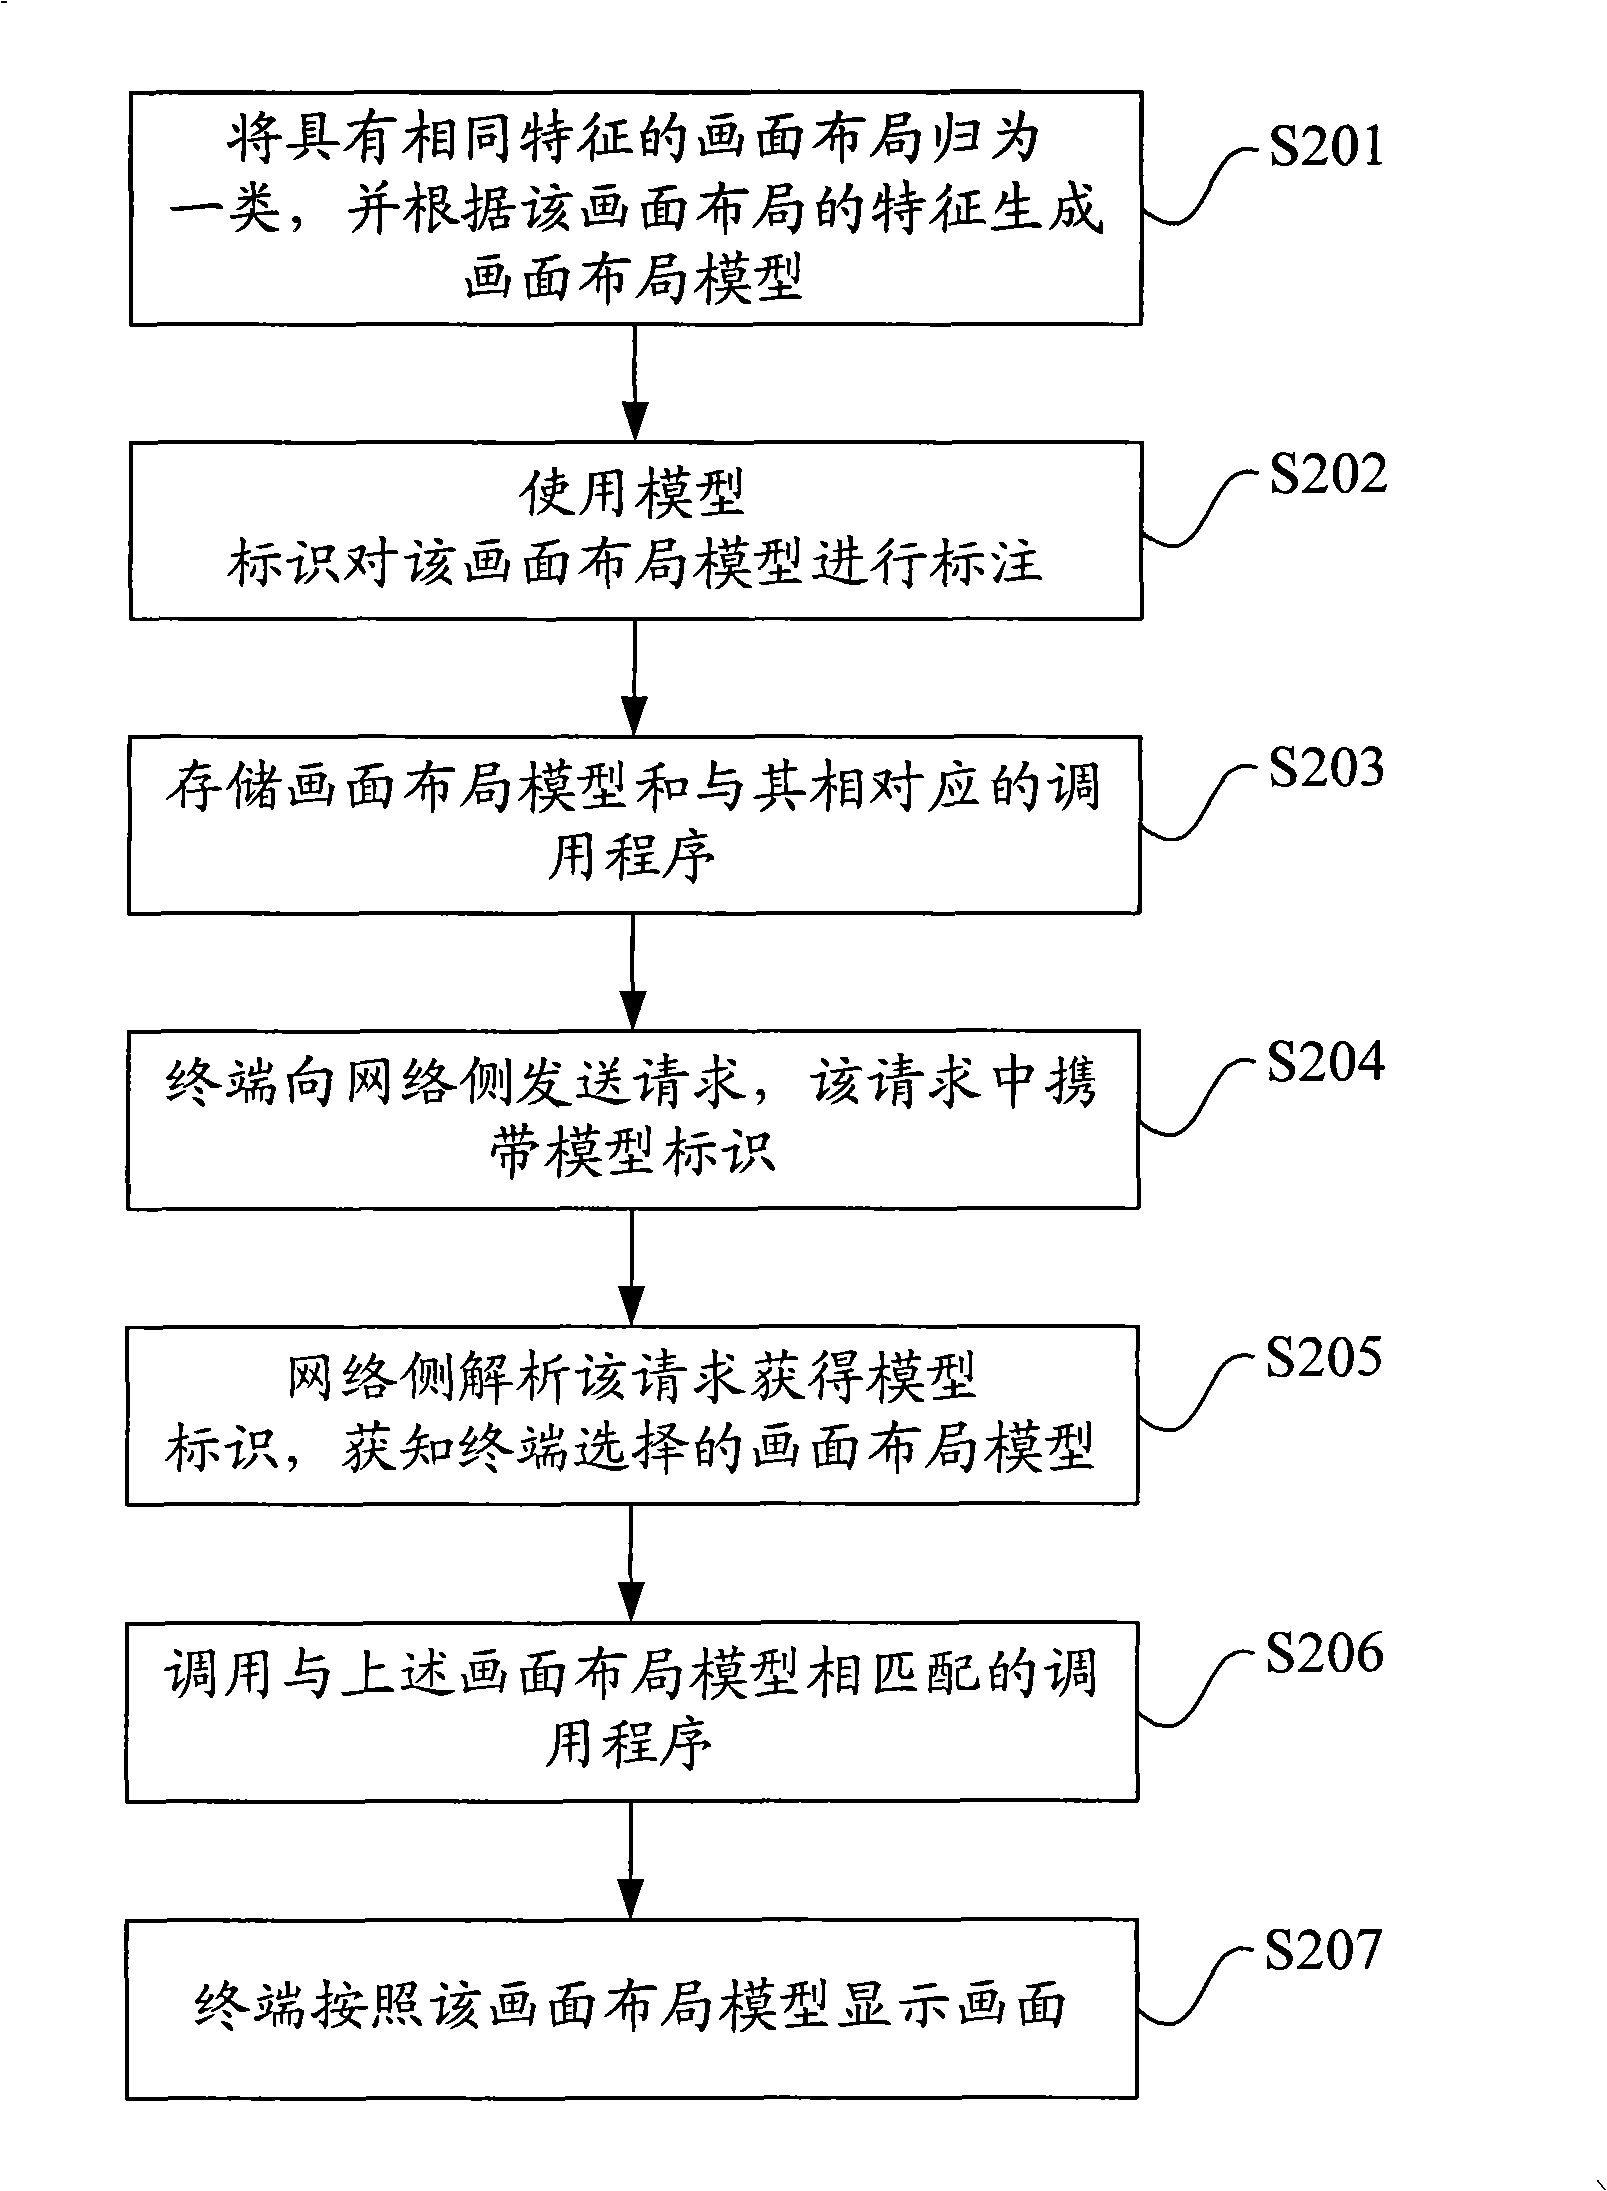 Method and apparatus for multiple image display control